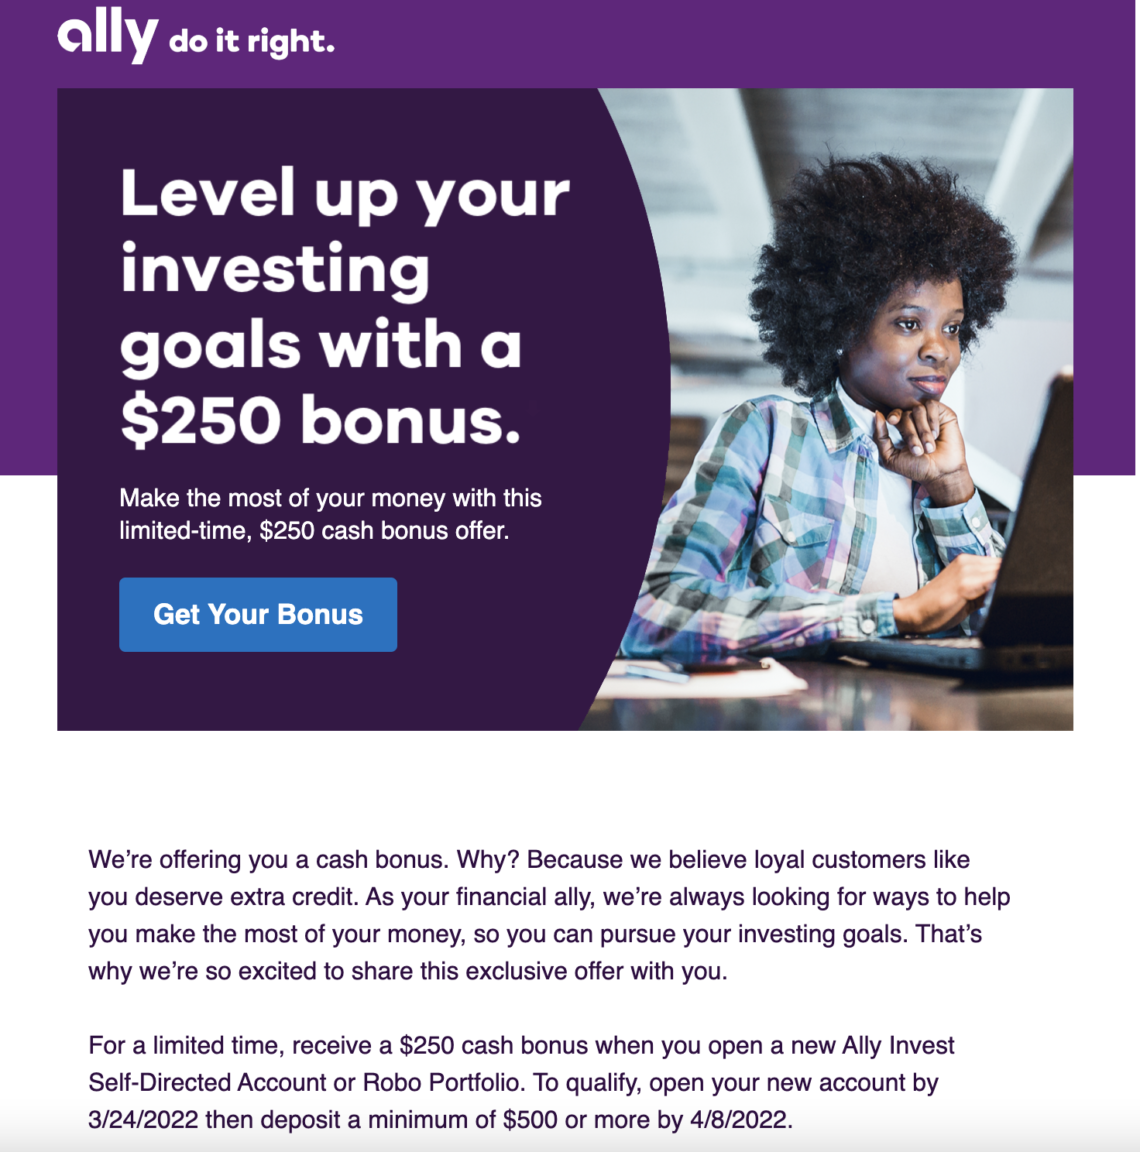 [Expired] [Targeted] Ally Bank Customers Get 100250 Bonus With New